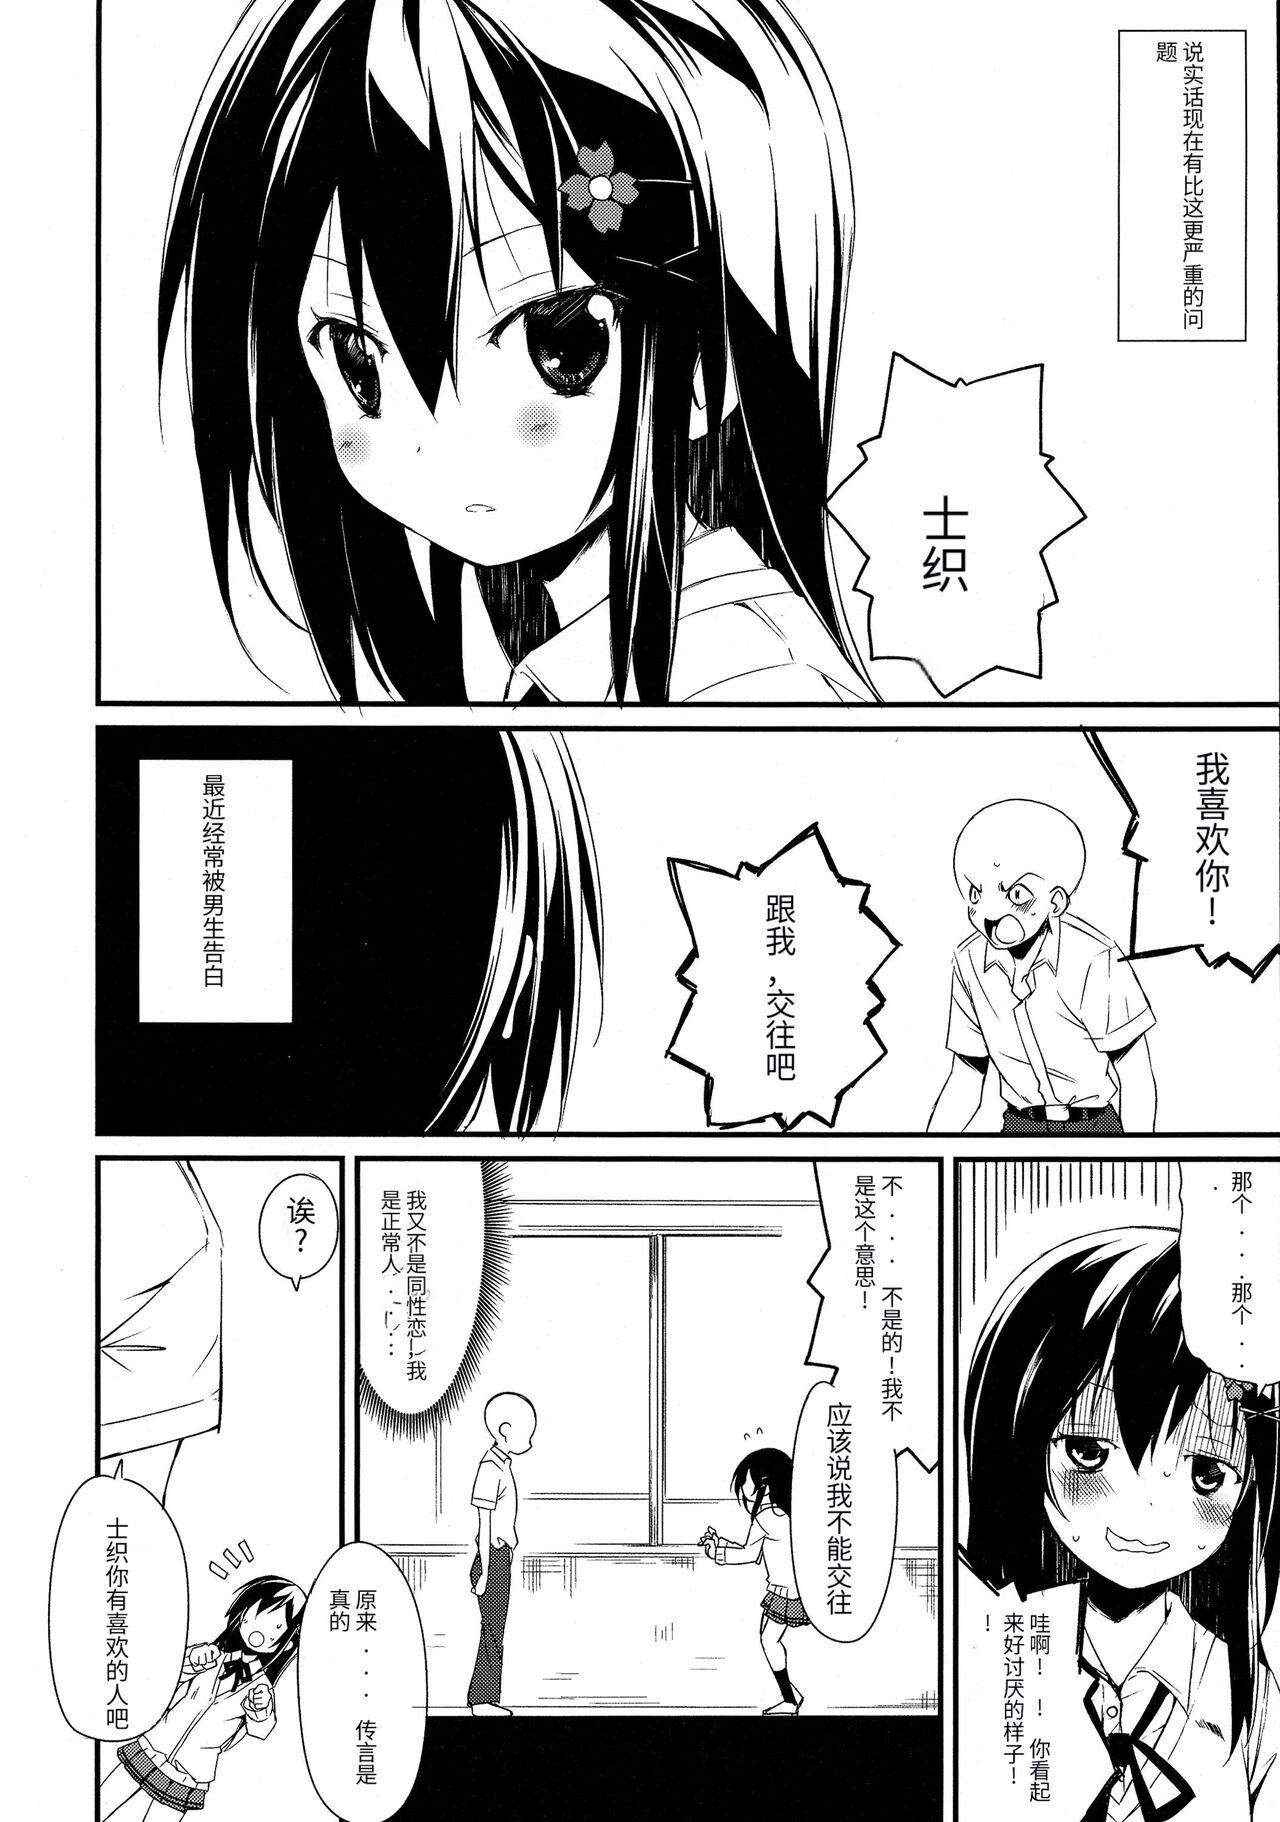 European Porn Shiori-chan, Yamaidon After School - Date a live Gay Kissing - Page 4